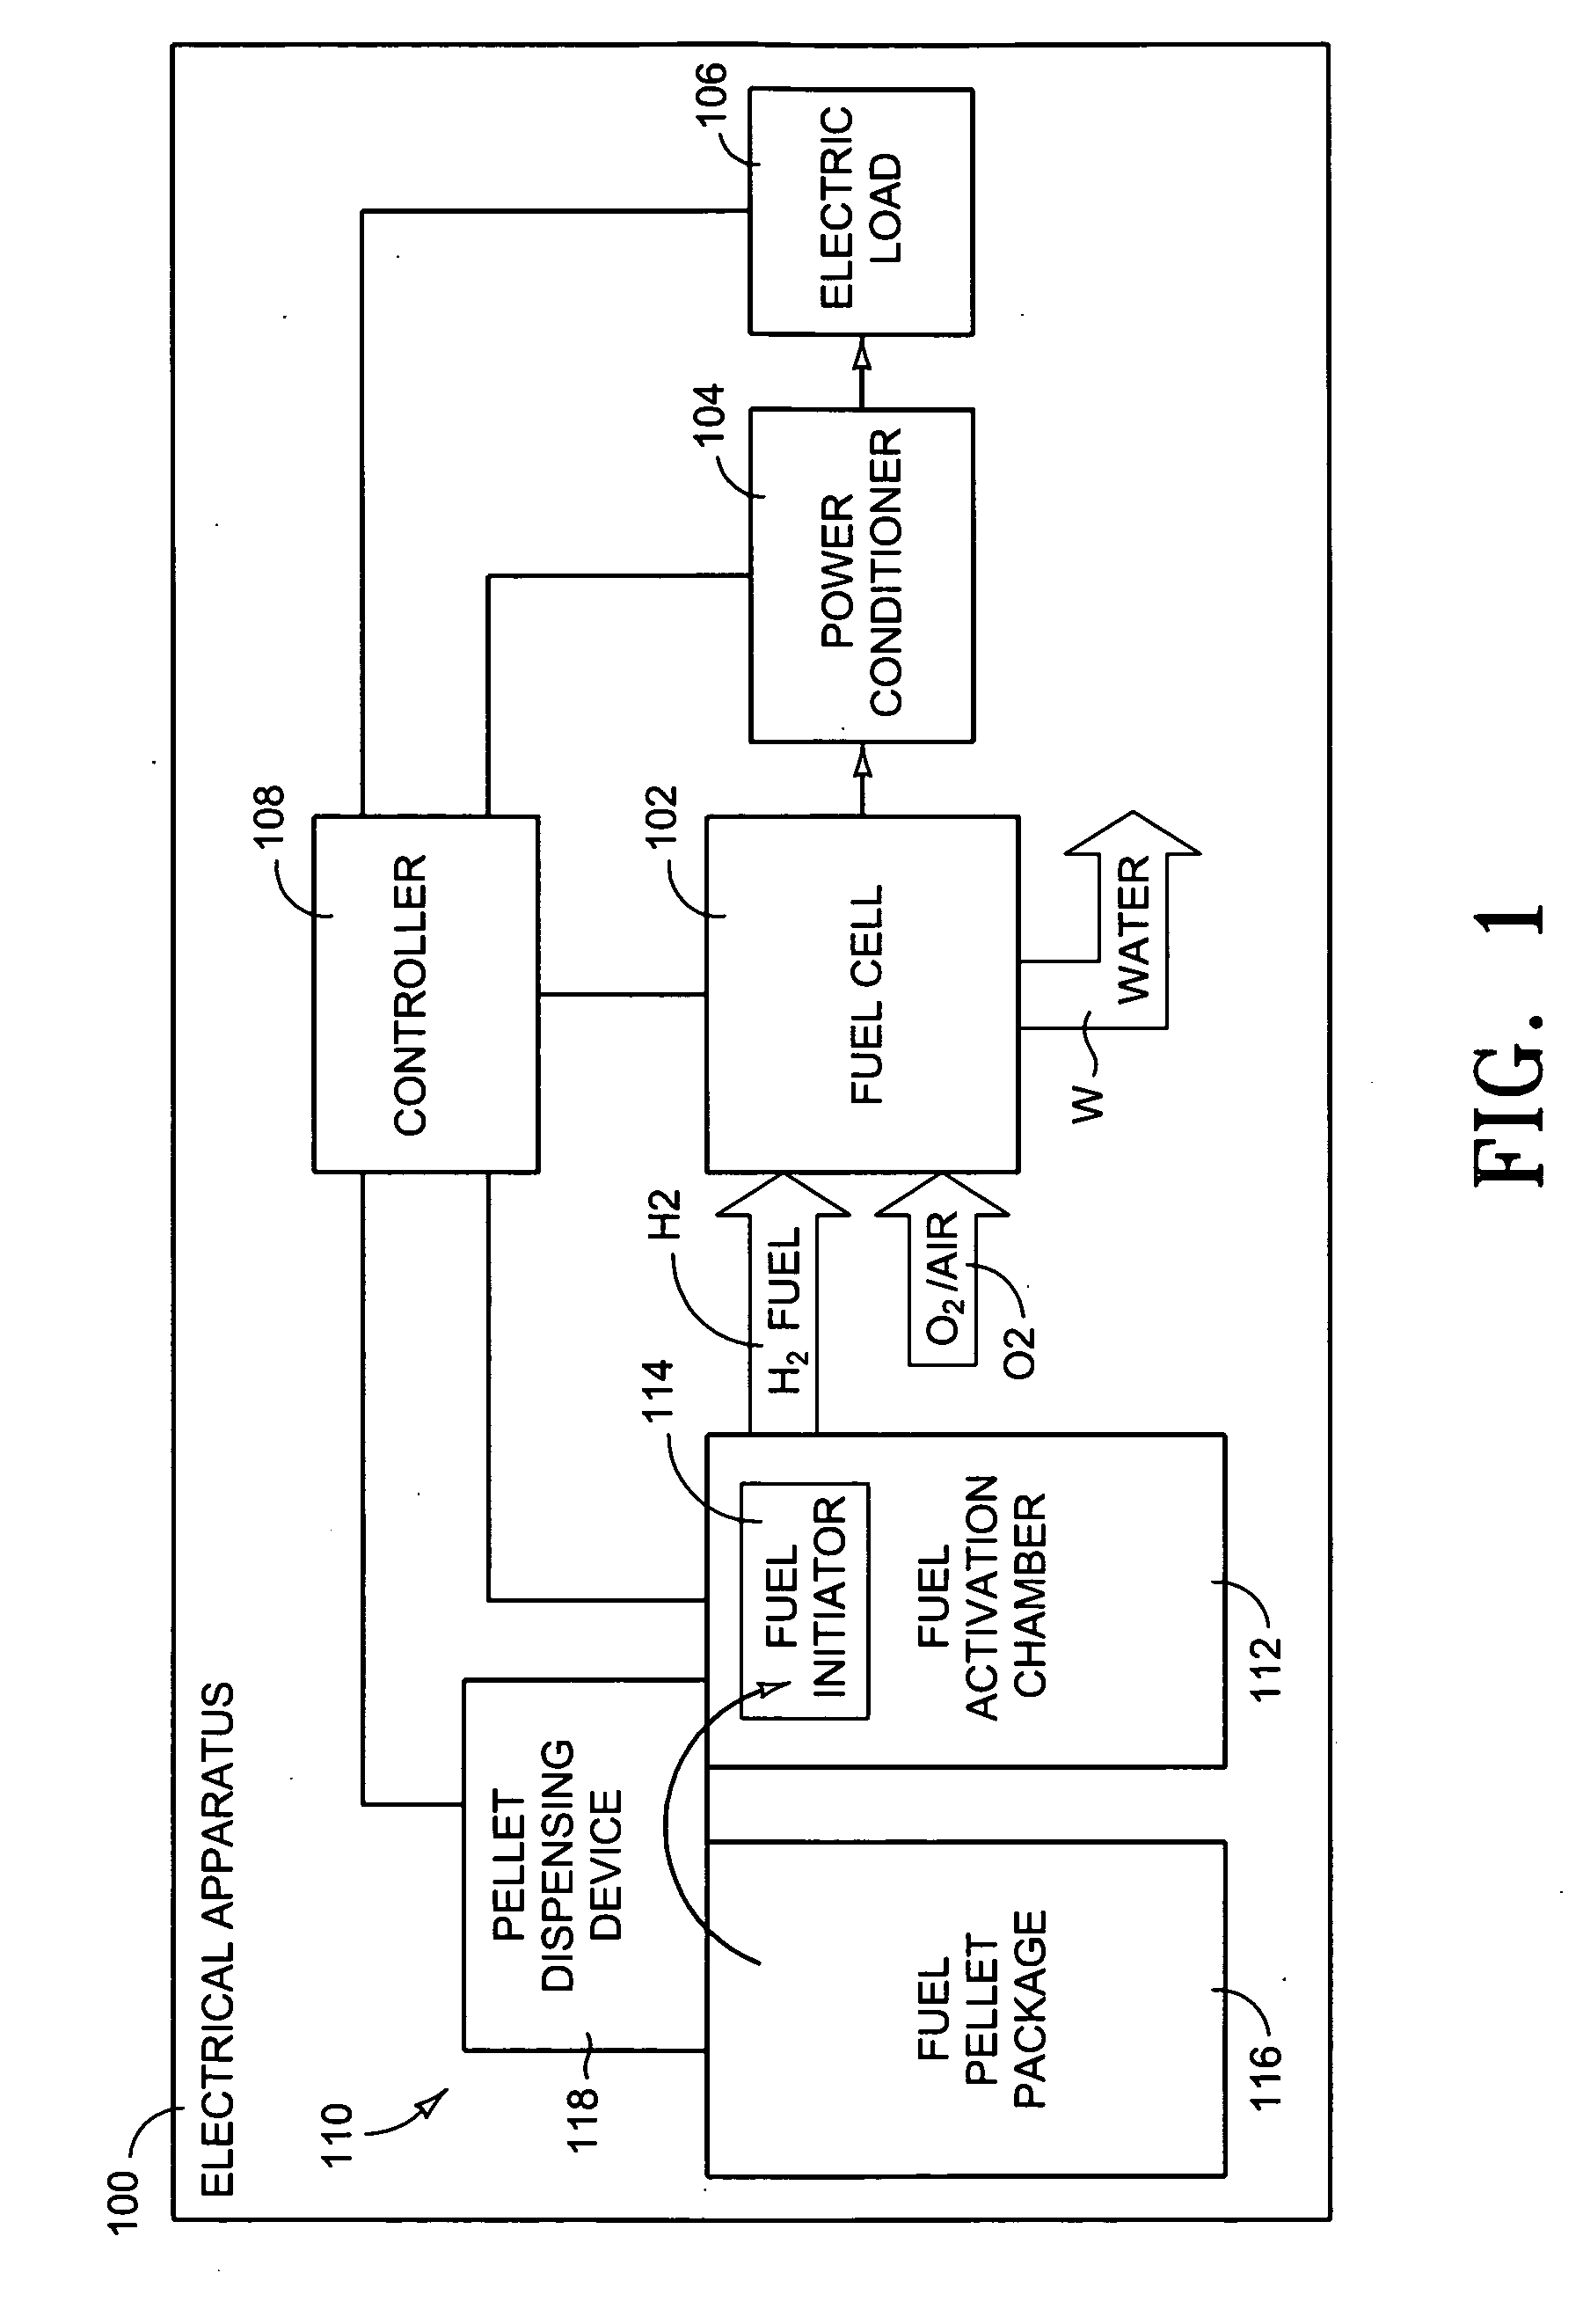 Method and system for dispensing pelletized fuel for use with a fuel cell